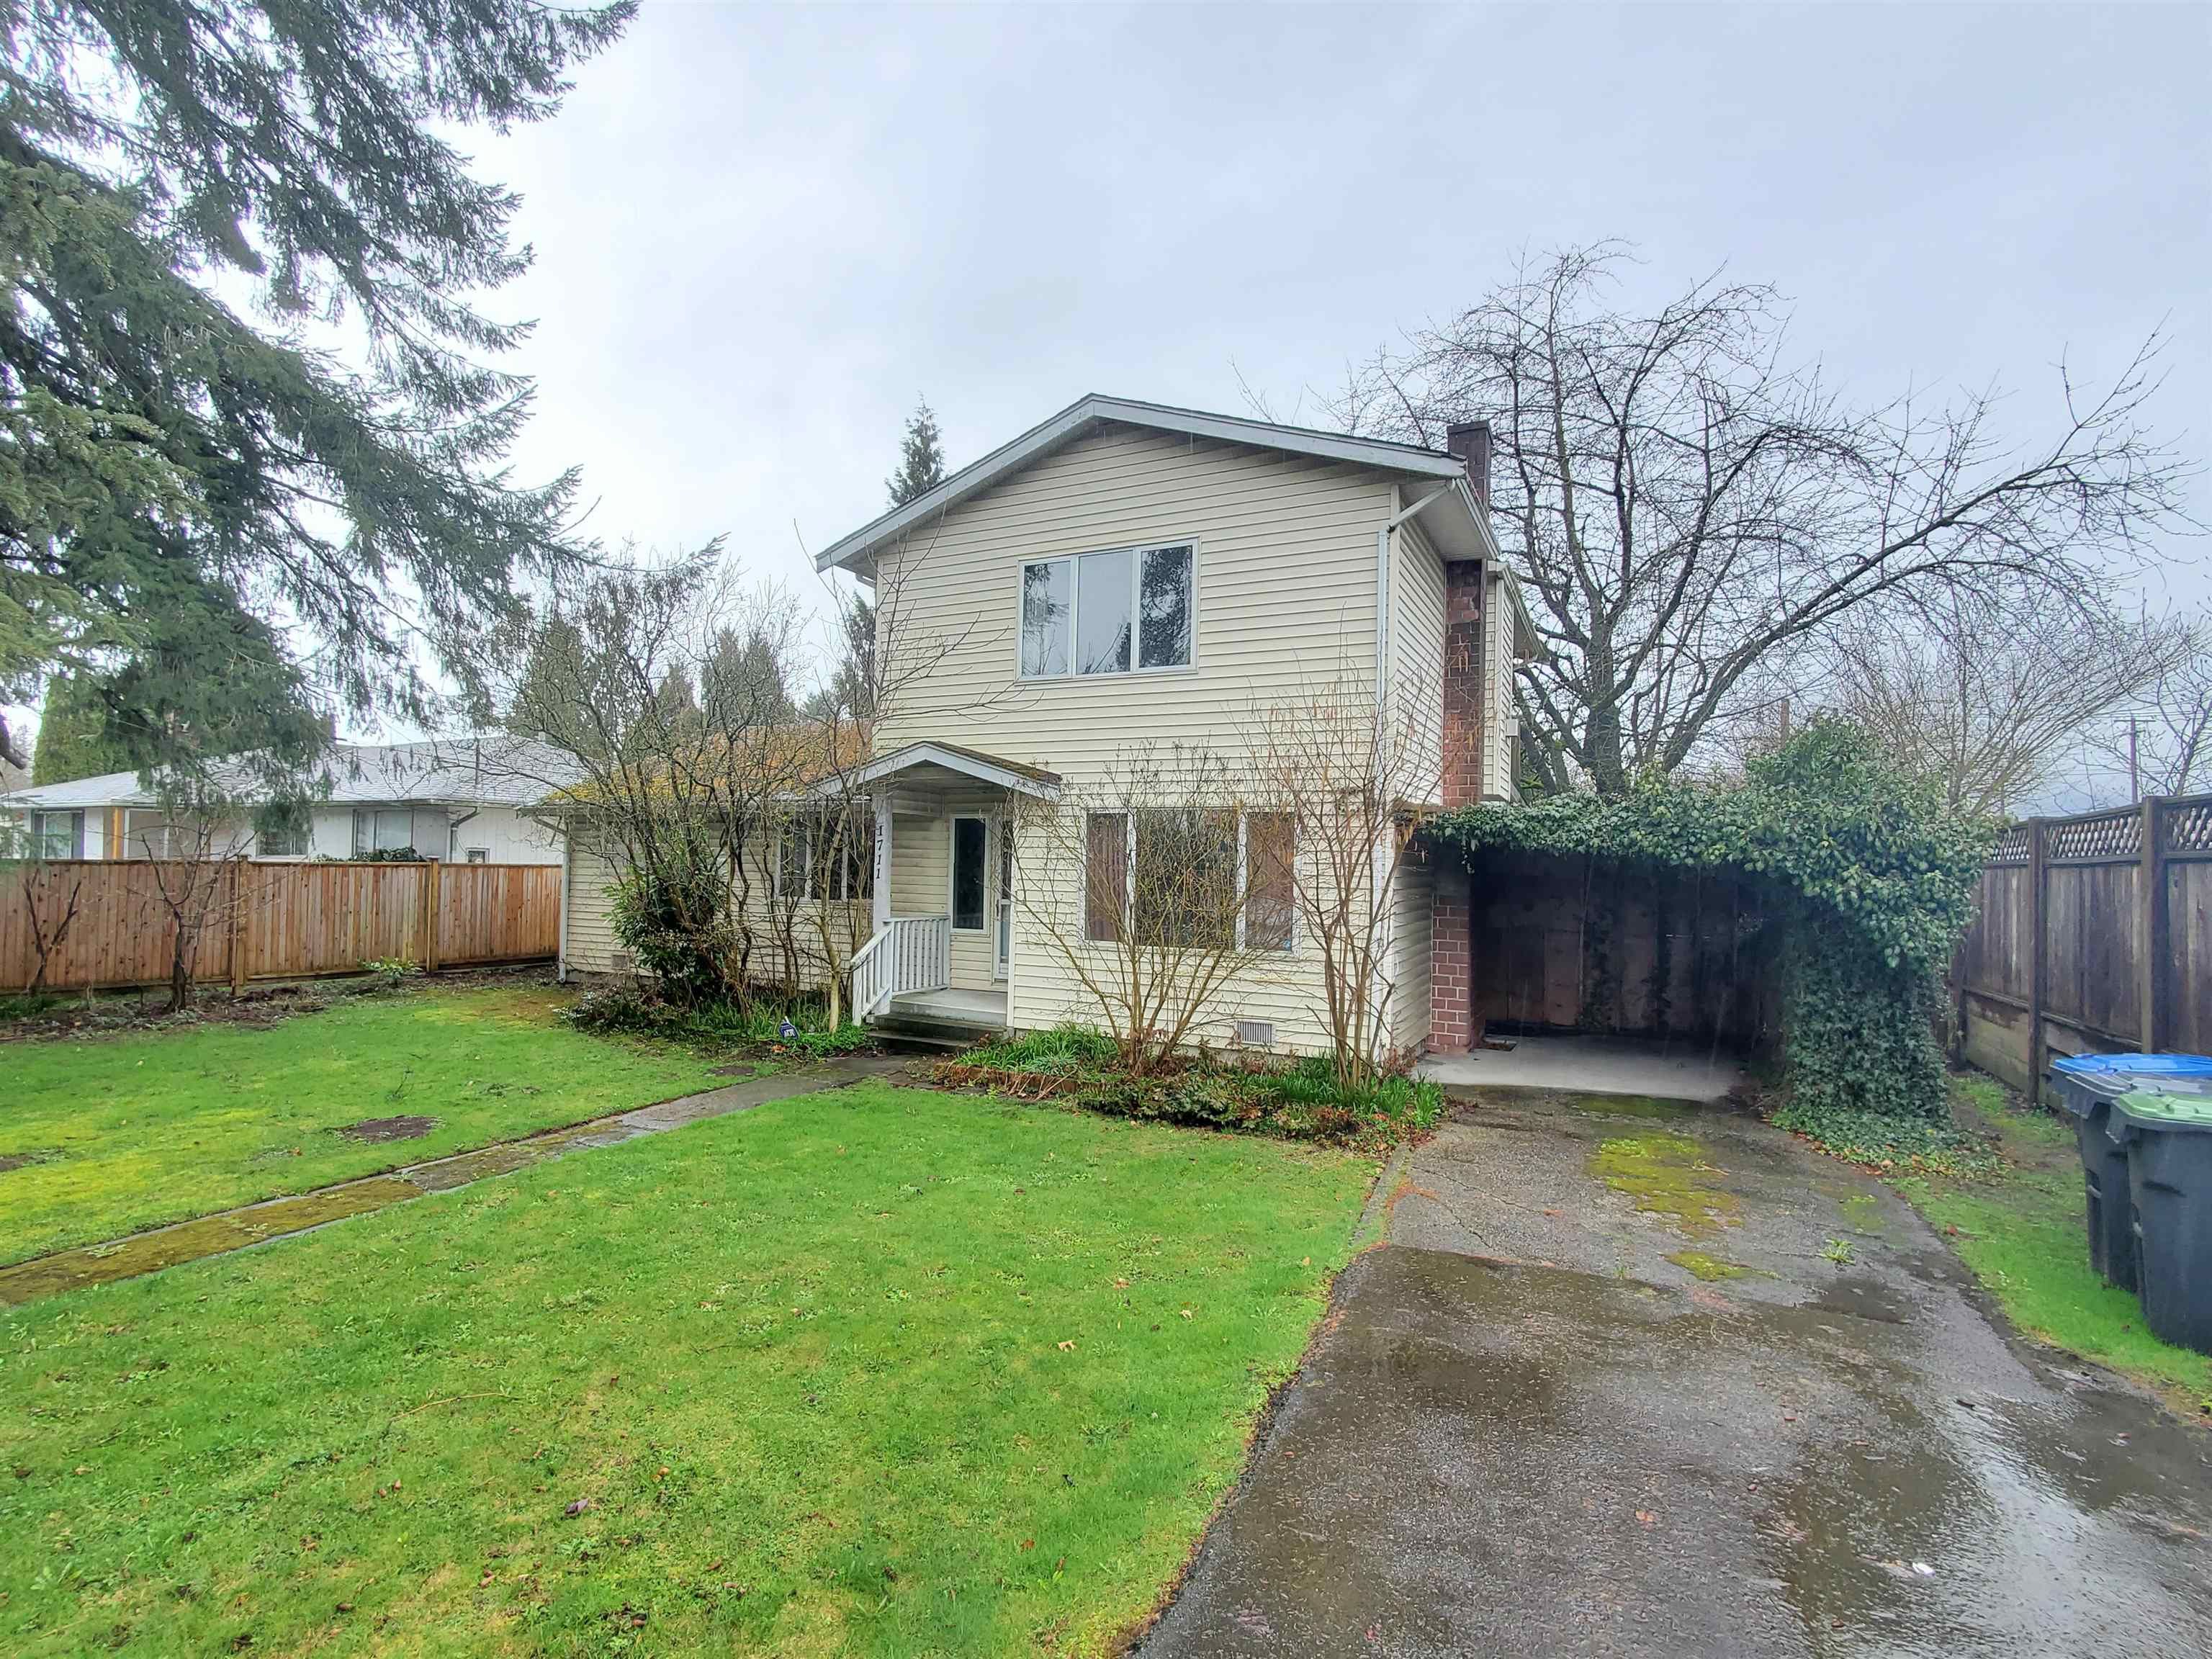 New property listed in Lower Mary Hill, Port Coquitlam